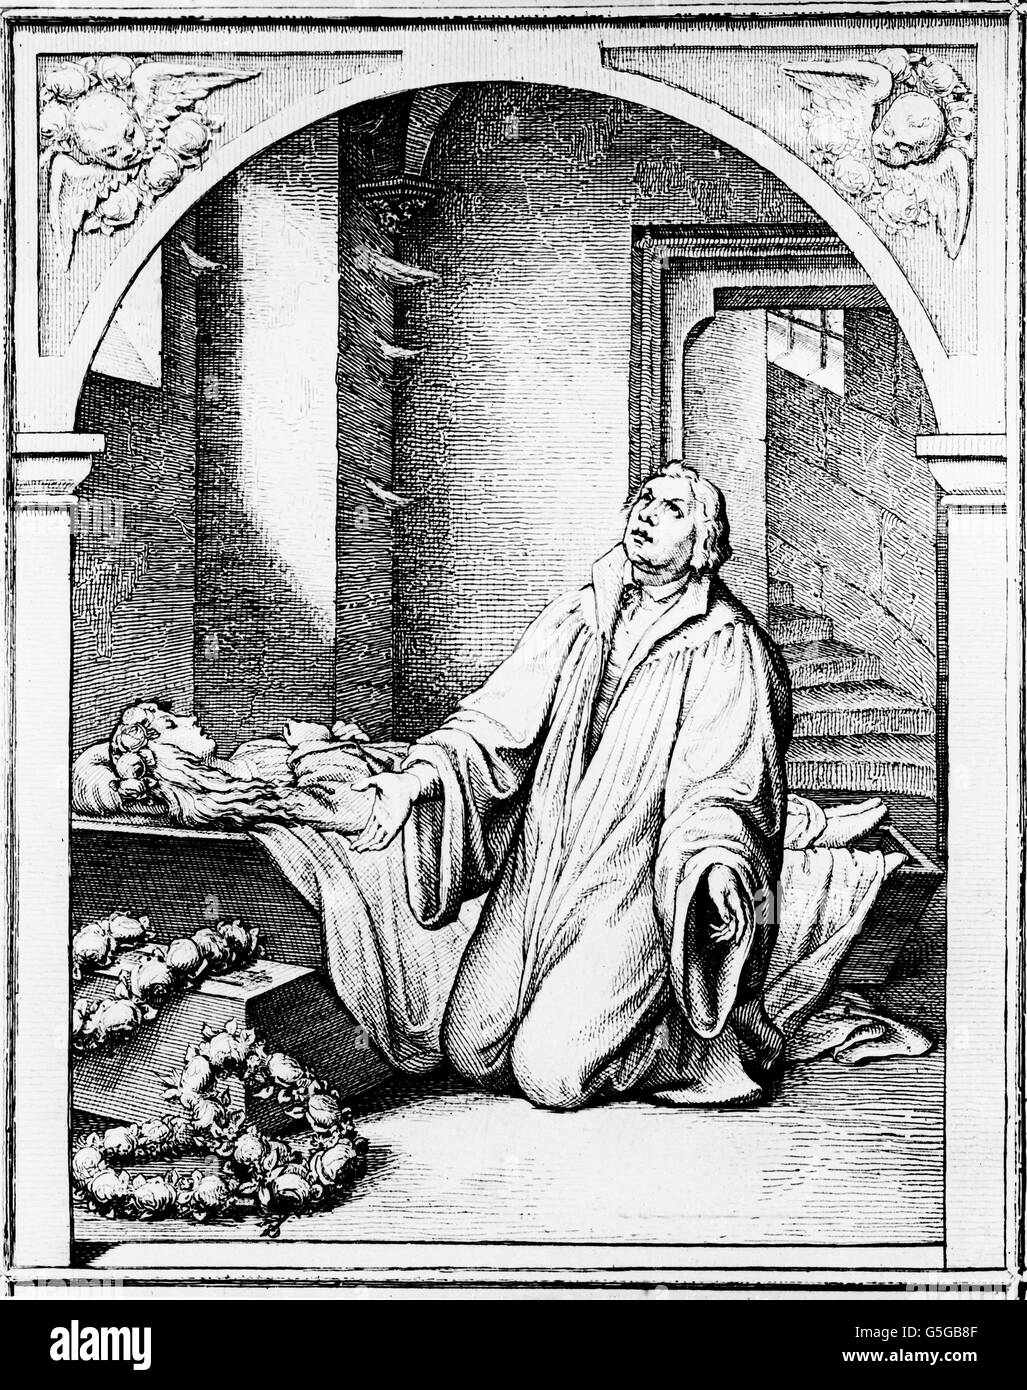 Martin Luther betet am Sterbebett eines Mädchens. Martin Luther praying at a deathbed of a girl. Stock Photo